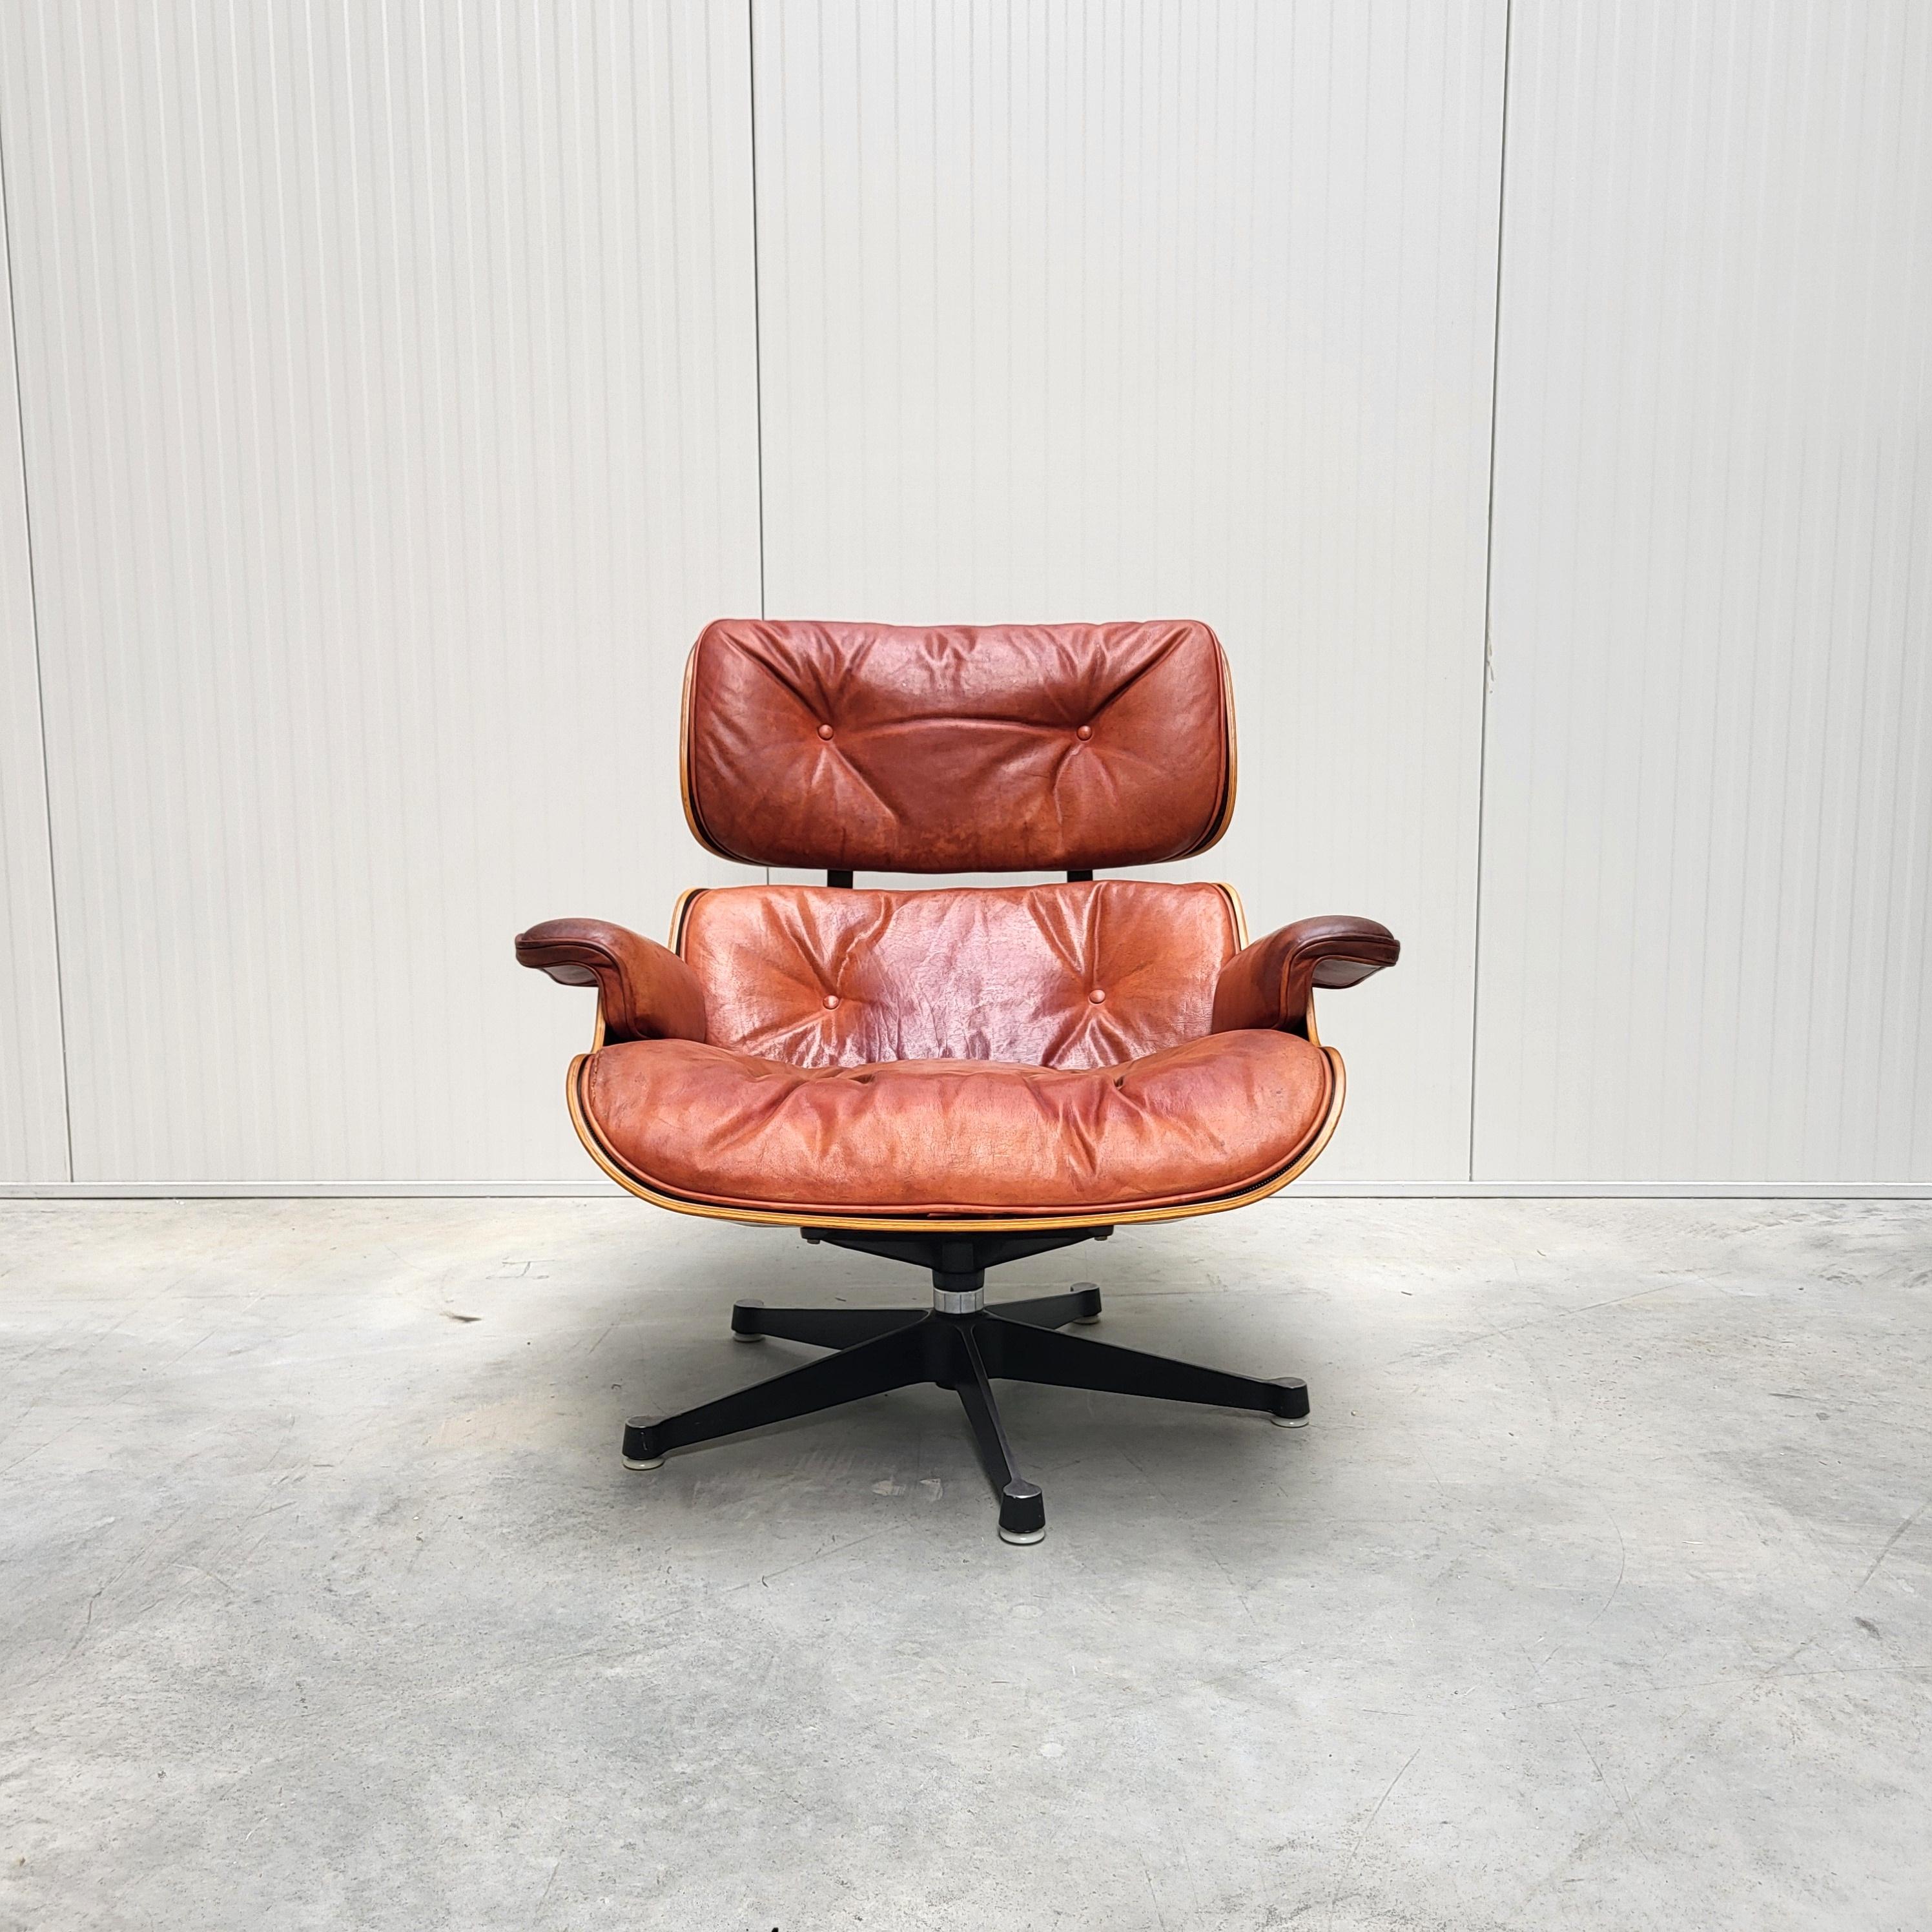 This rare lounge chair was designed by Charles & Ray Eames and were produced by Herman Miller in the early 1970s. It is one of the earlier lounge chairs which were produced in Europe under the license of Vitra.

It is an early example which features